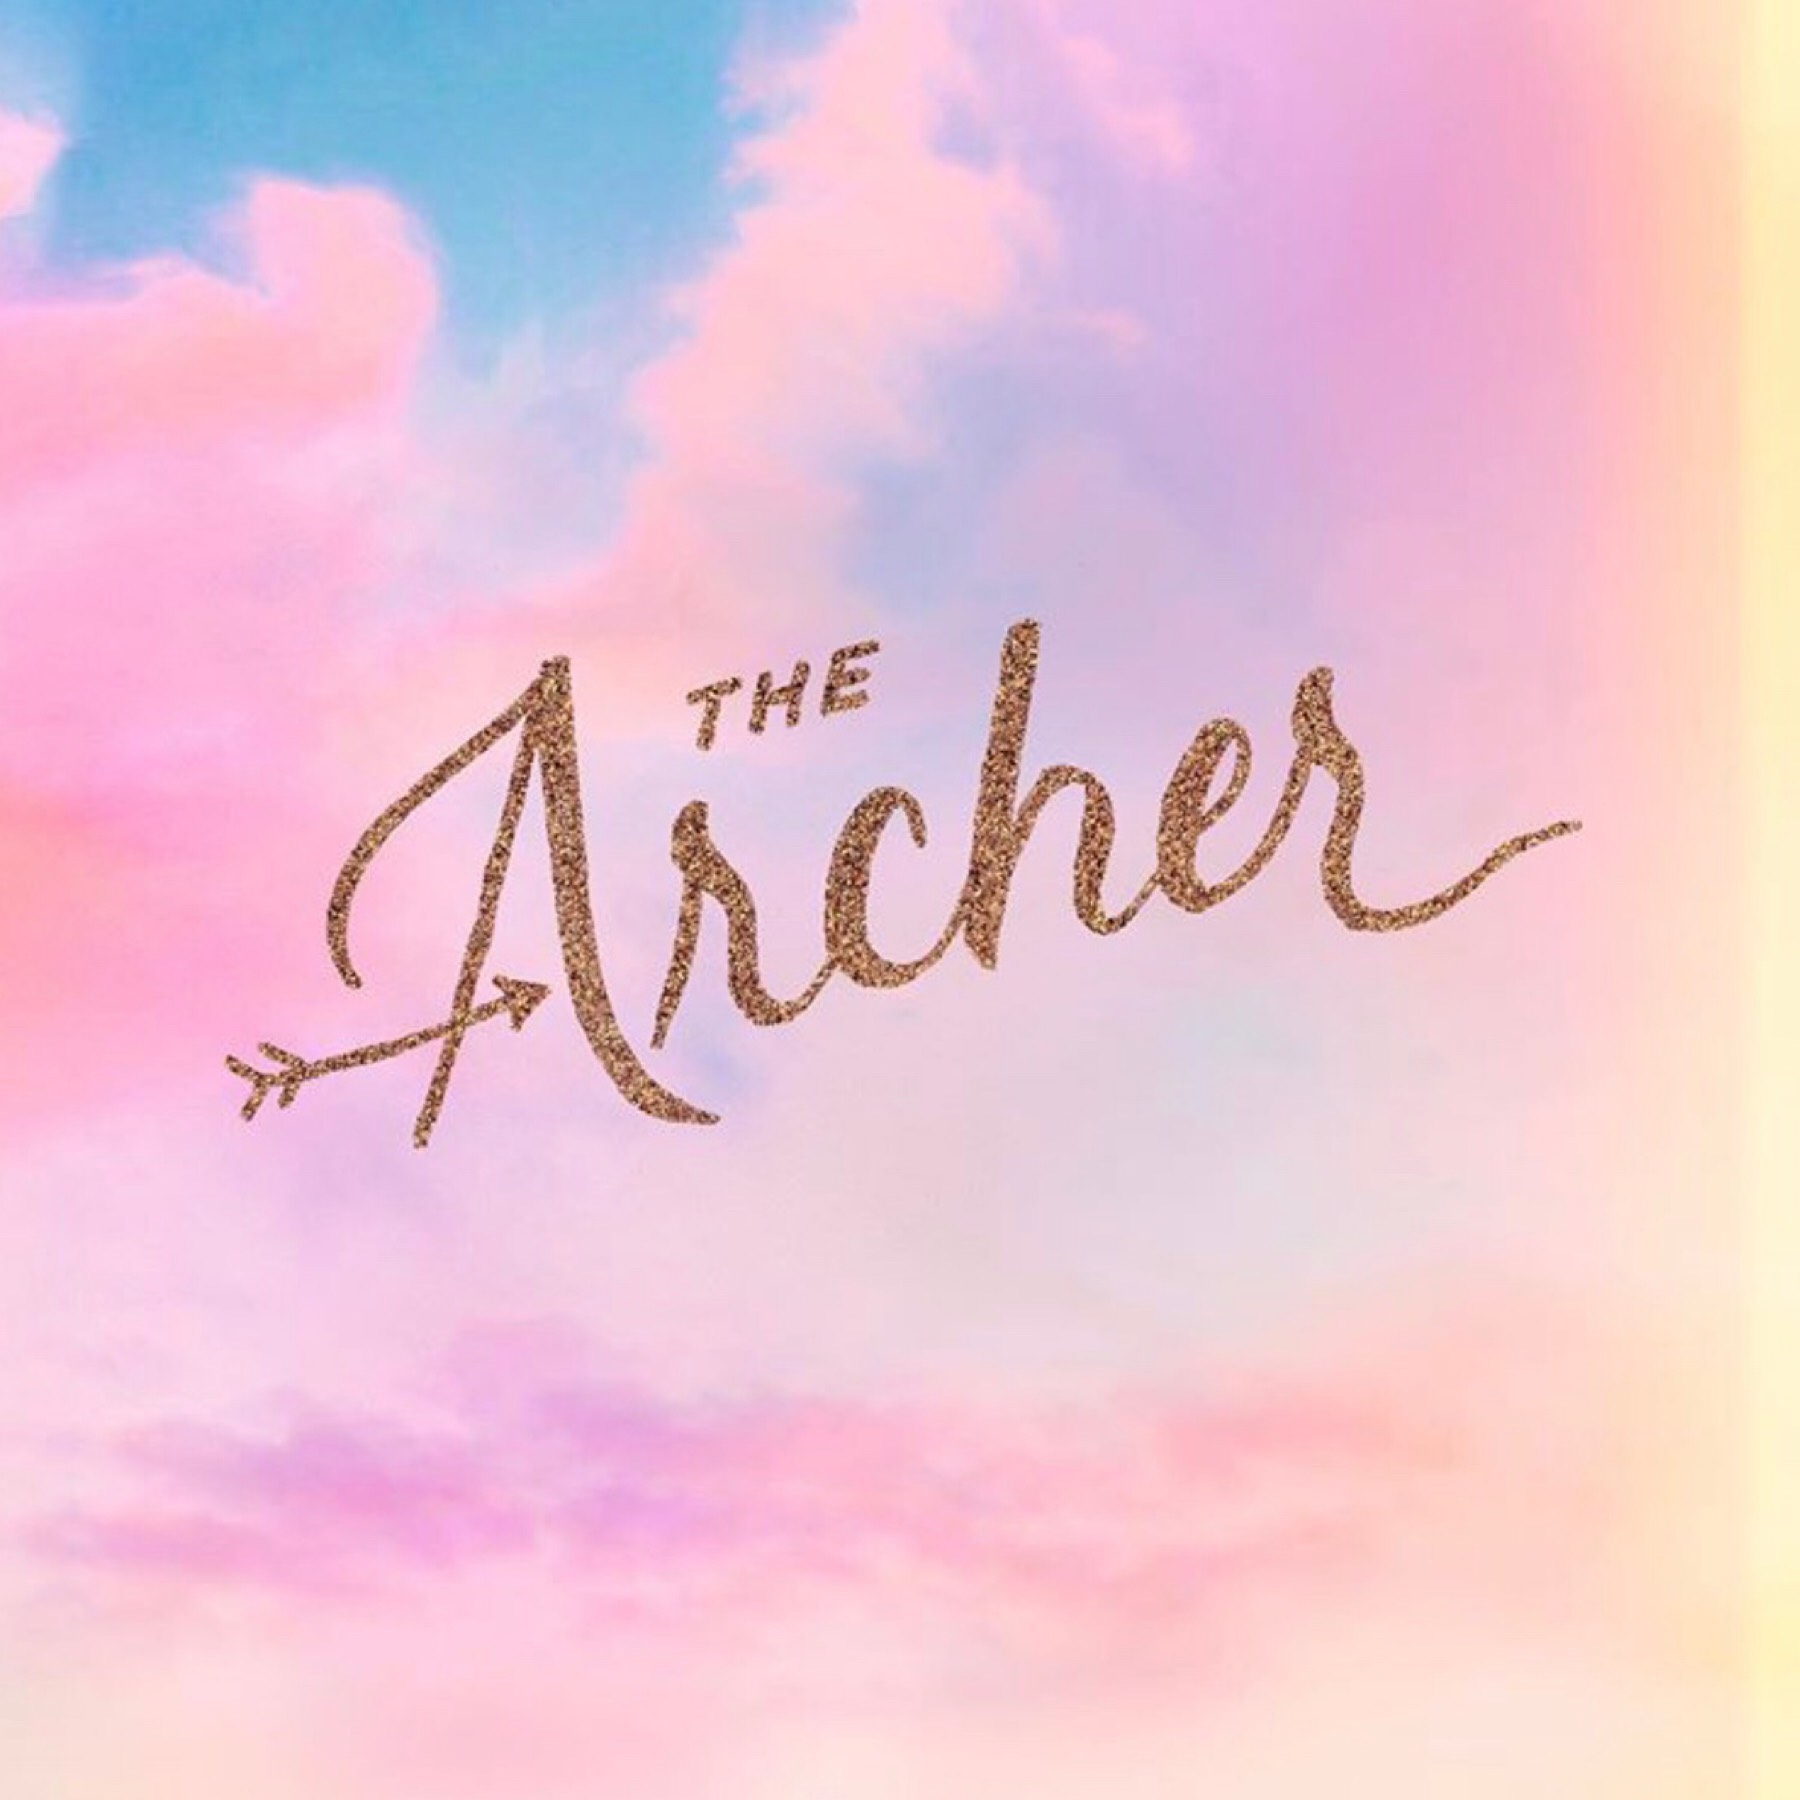 Taylor Swift has a new song ‘The Archer’ out now! 🏹💘 make sure to go stream and watch now! It’s so good! 🦋